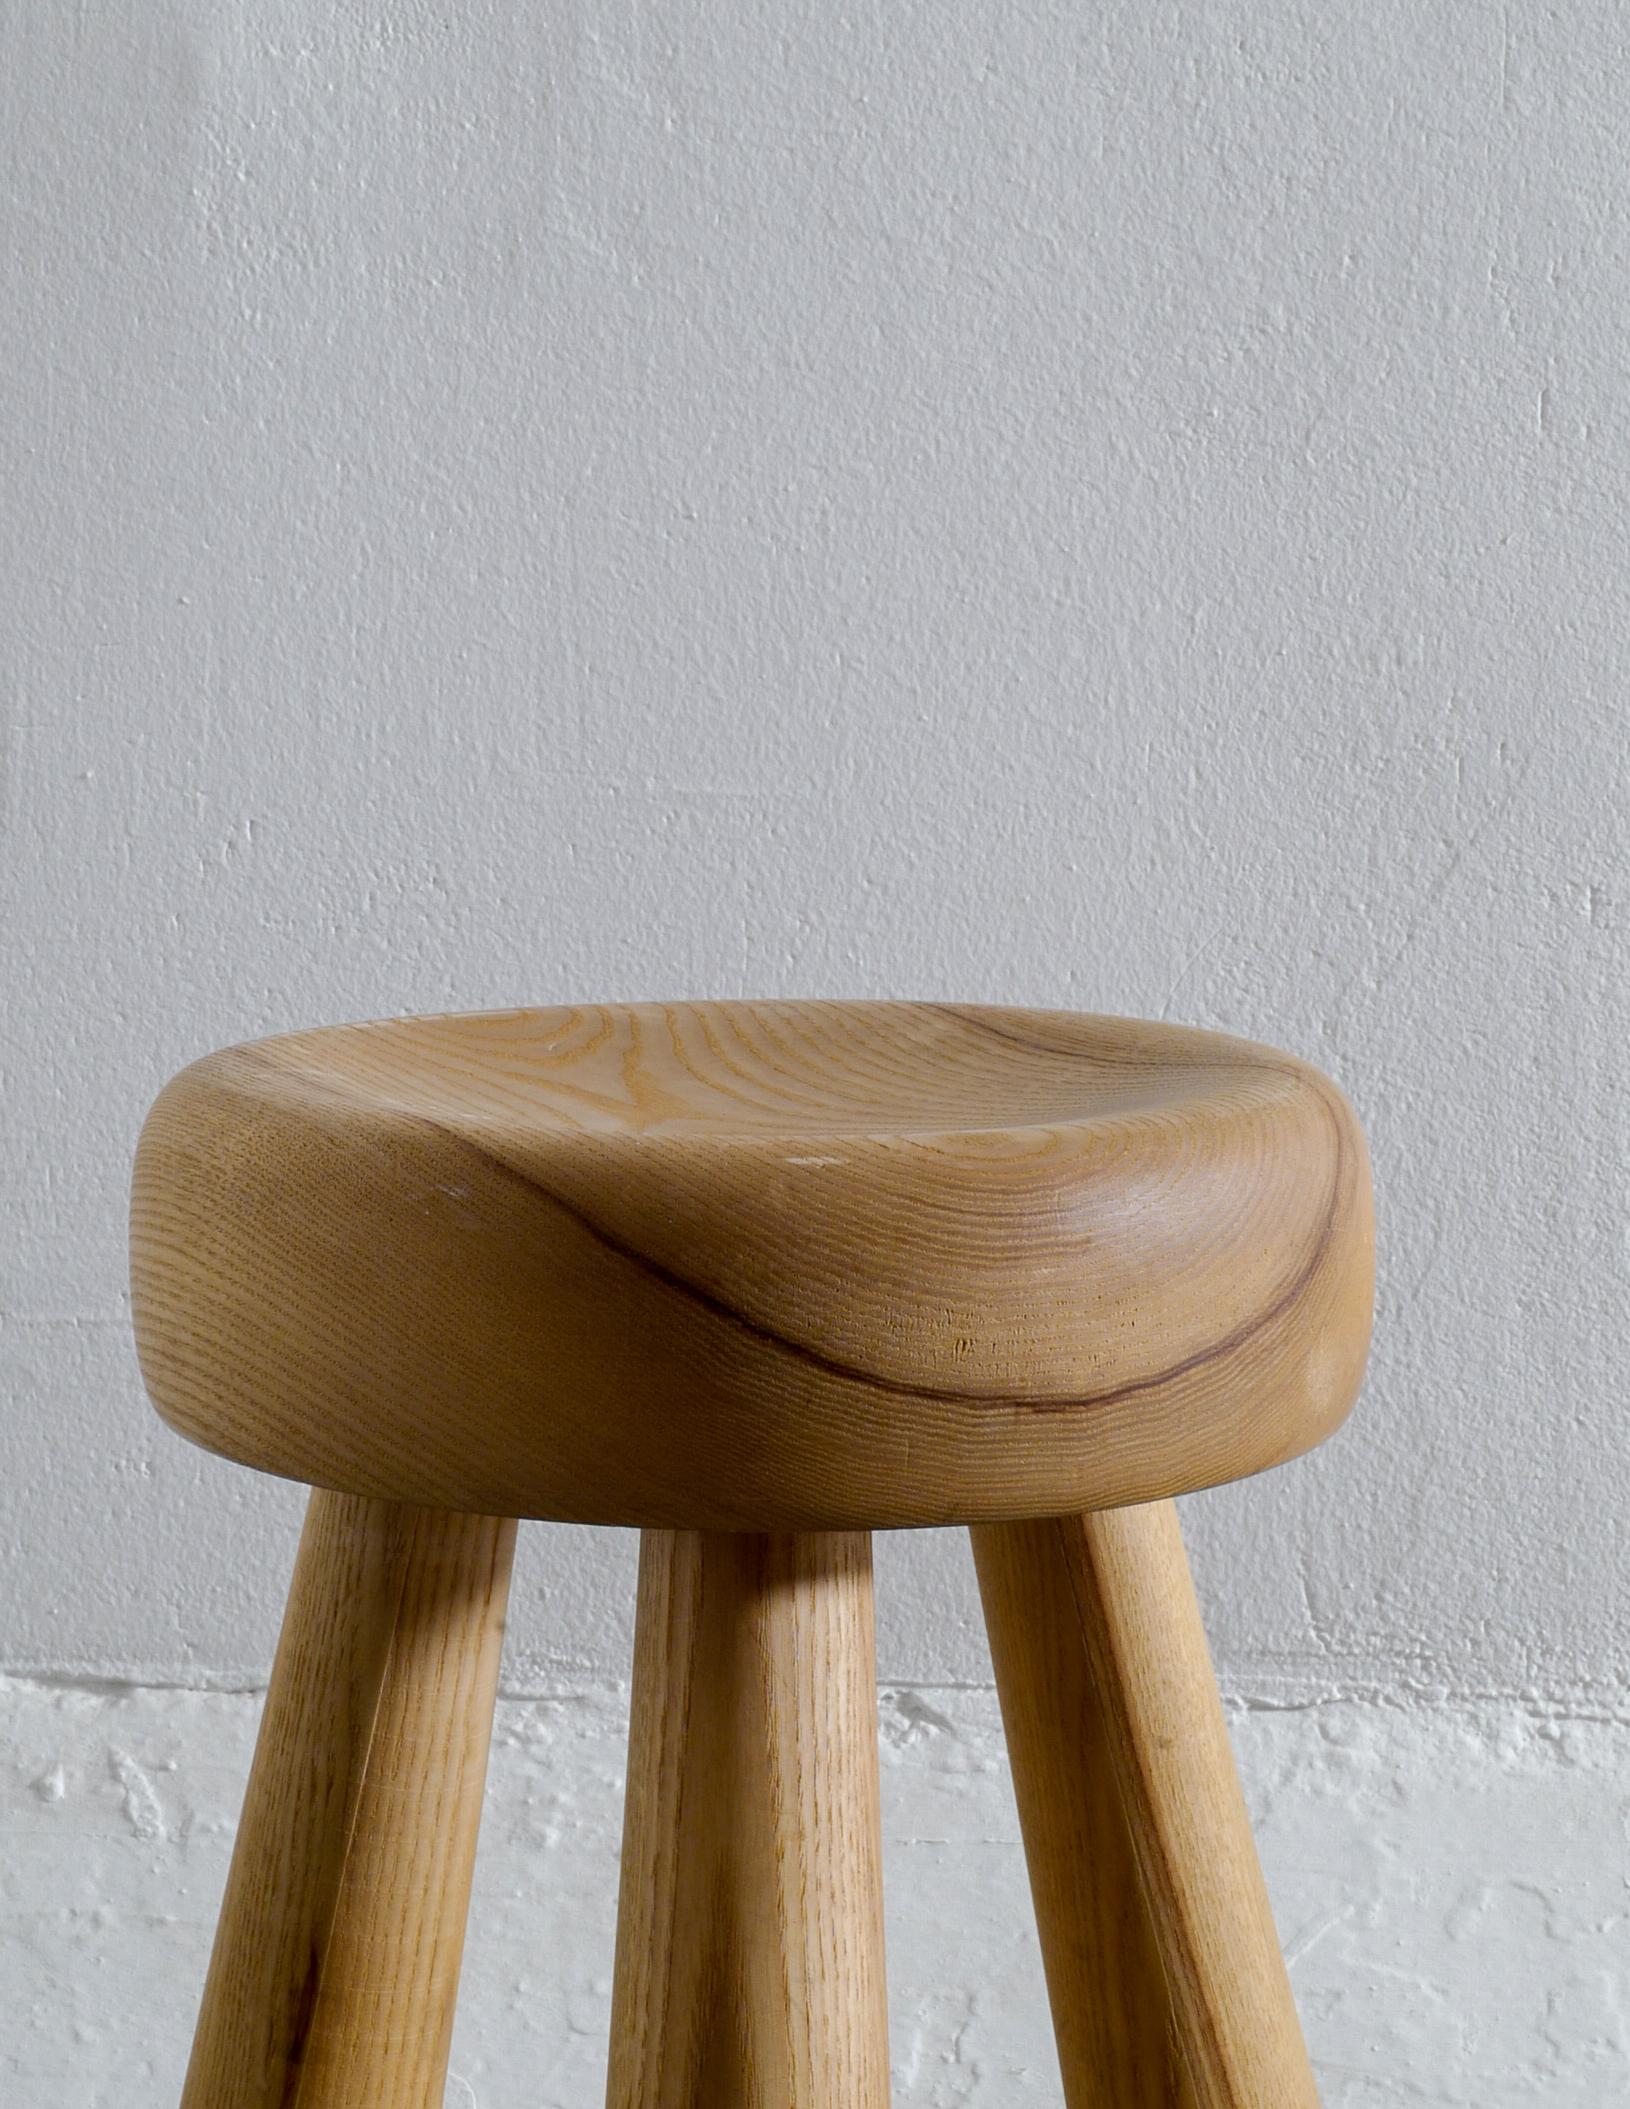 Swedish Ingvar Hildingsson Tripod Stool in Solid Pine Produced in Sweden, 1970s